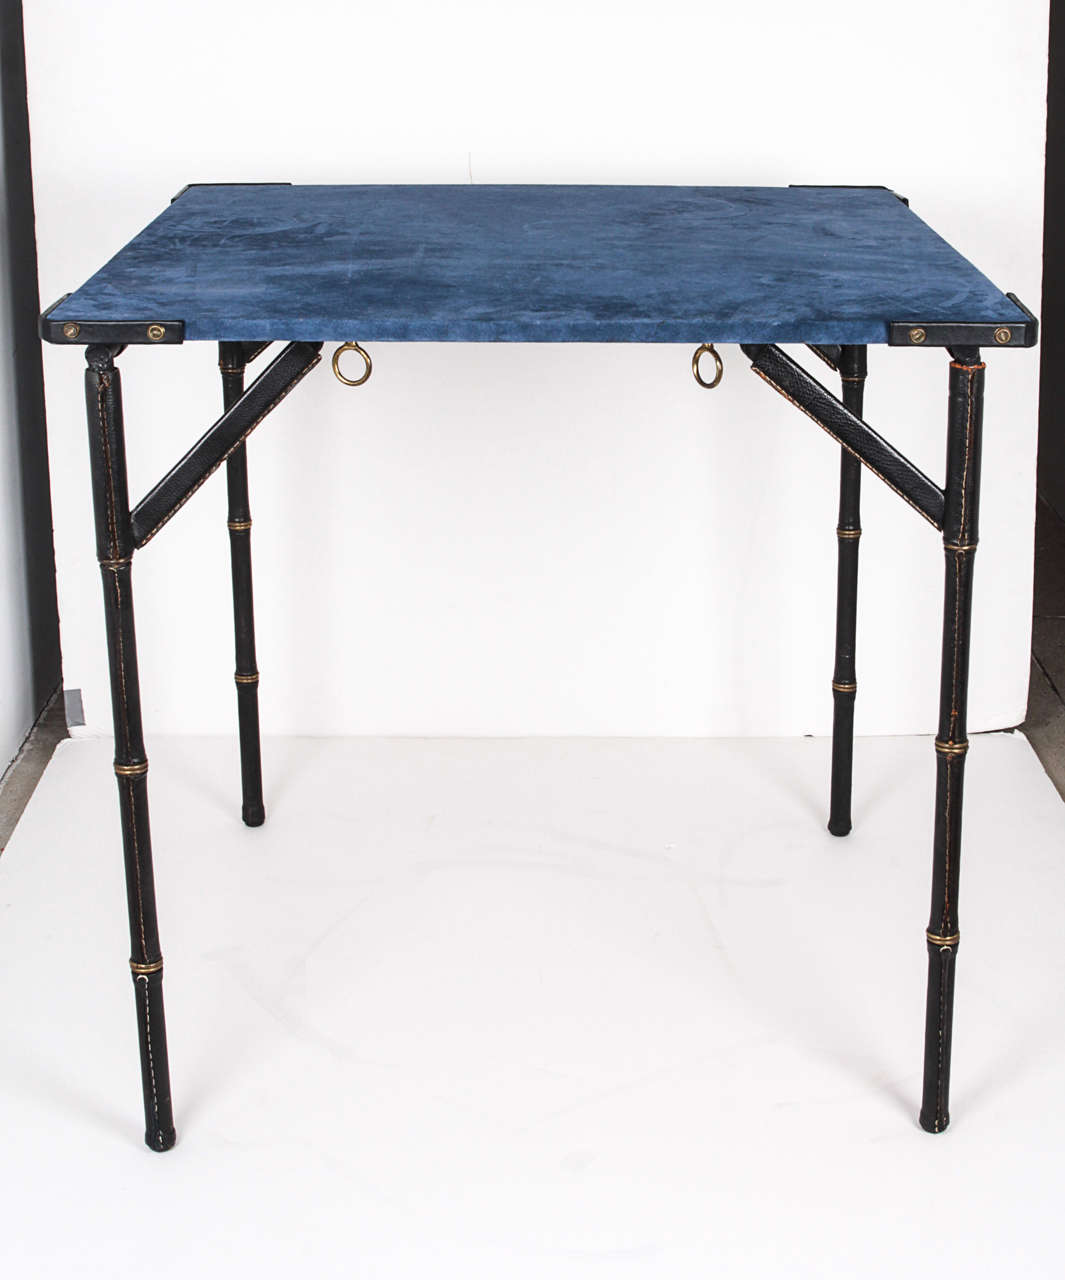 1950's stitched leather game table
covered with  blue suede top